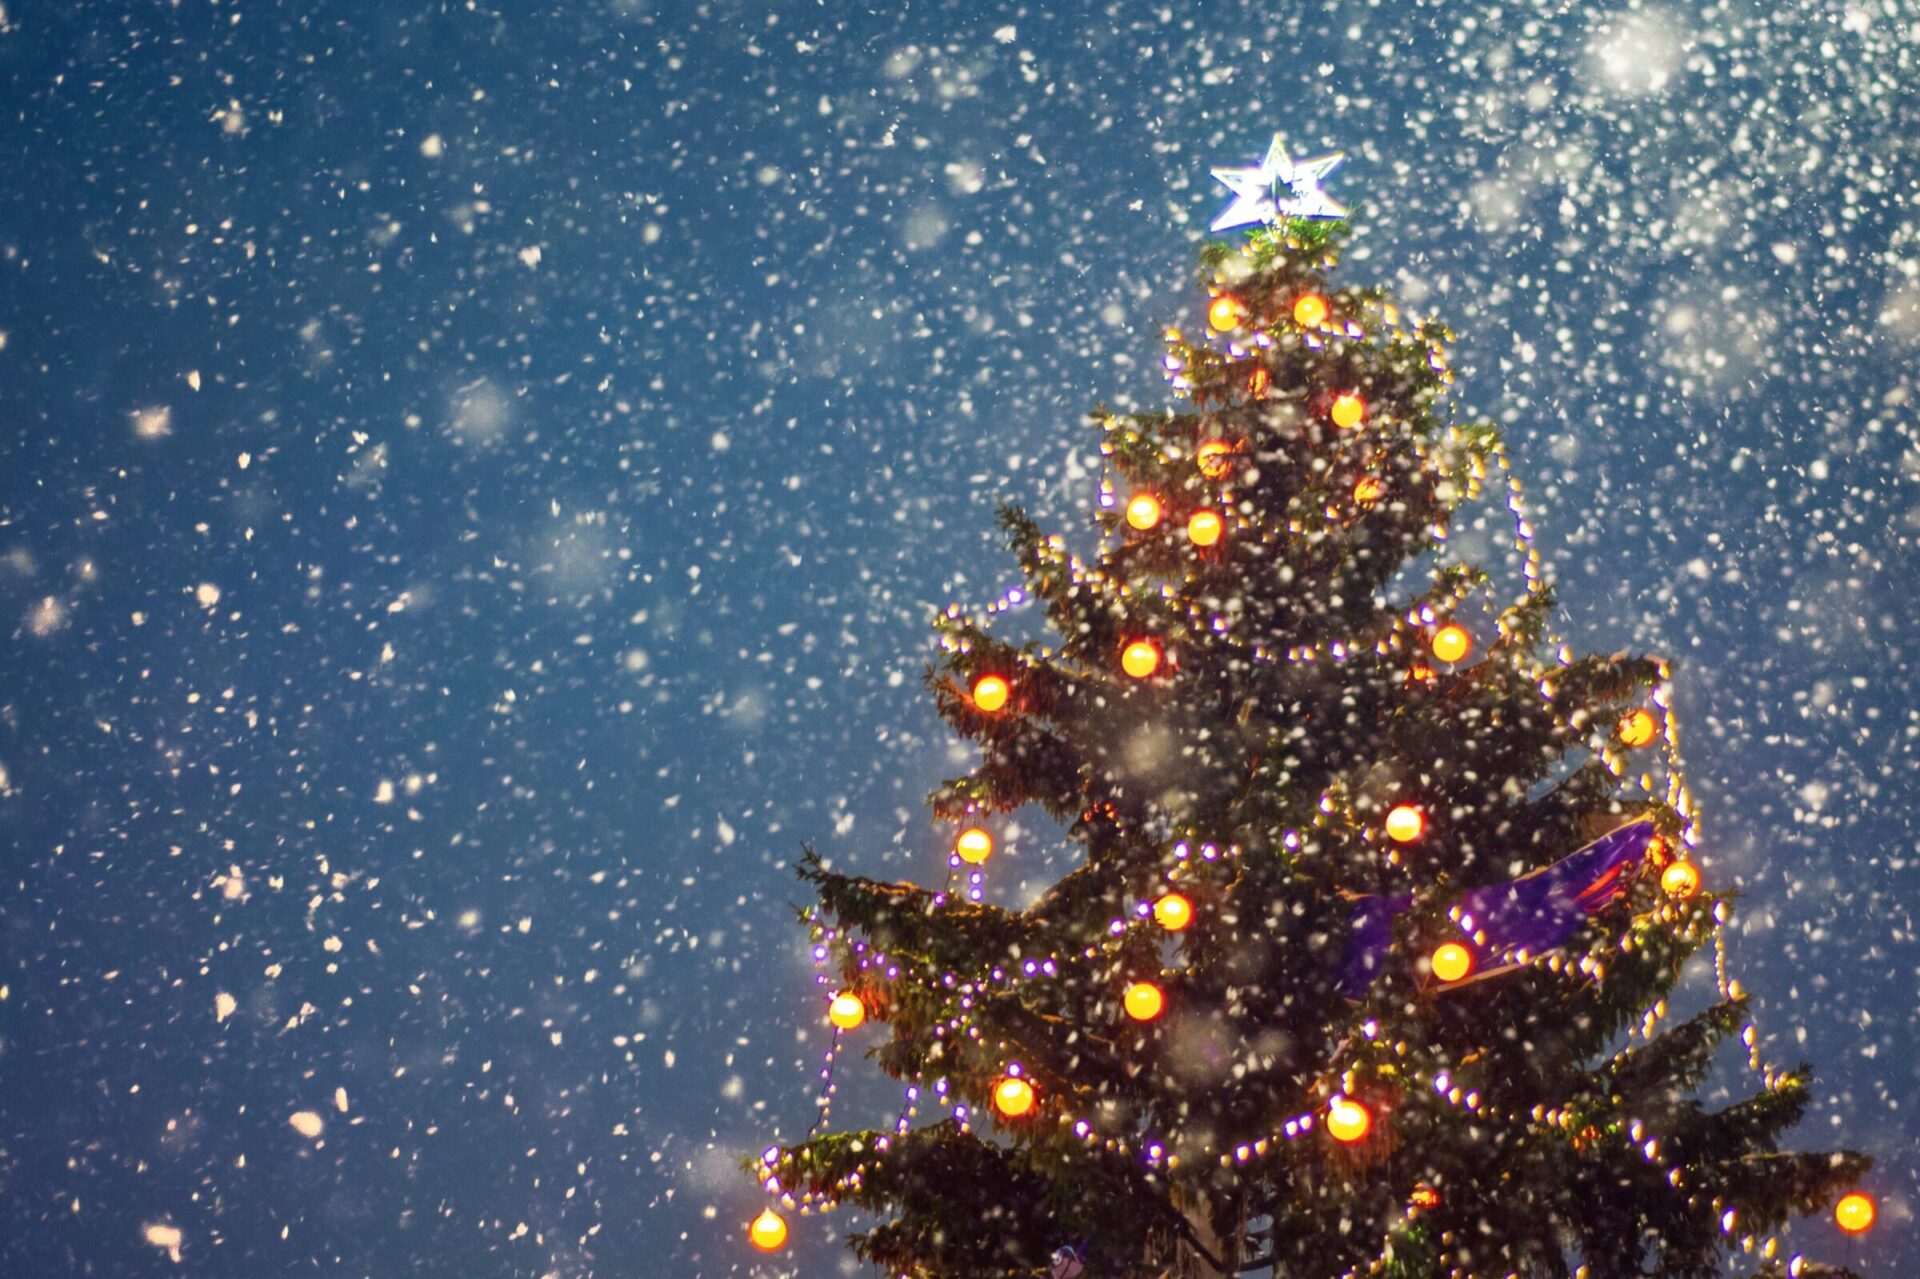 An illuminated Christmas tree adorned with a star topper and colorful lights stands amid gently falling snow against a night sky.